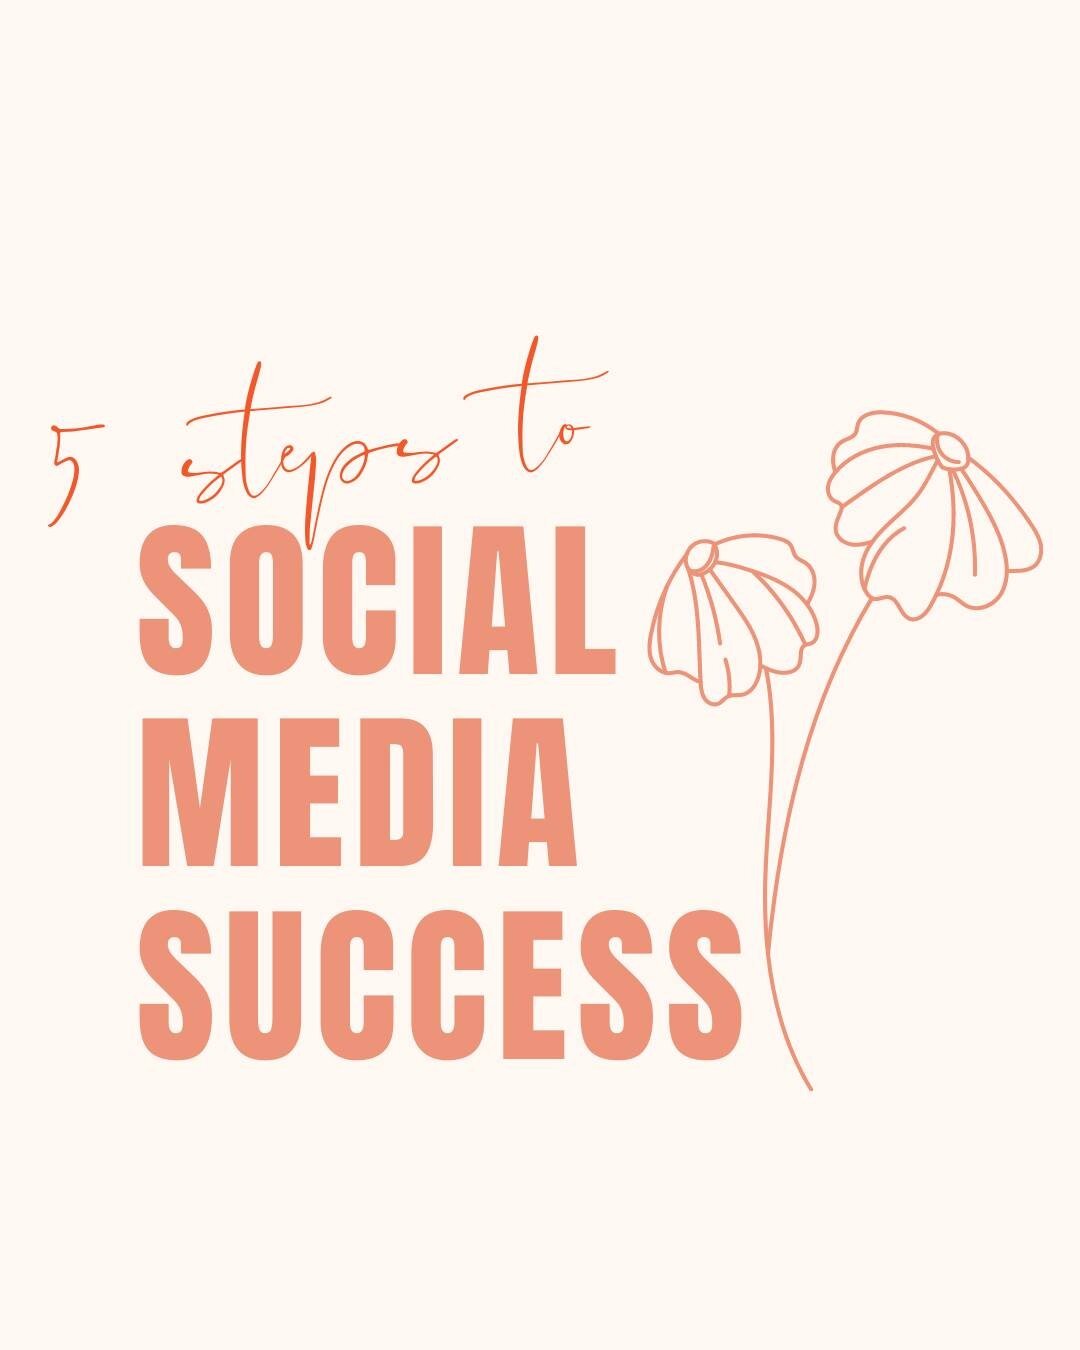 Swipe left for 5 steps to succeed on social media! ➡️

Share if you found this helpful! 🥰

#socialmedia #socialmediastrategy #socialmediatraining #socialmediacourse #contentcreation #compellingcontent #contentideas #postingtoinstagram #ideasforinsta